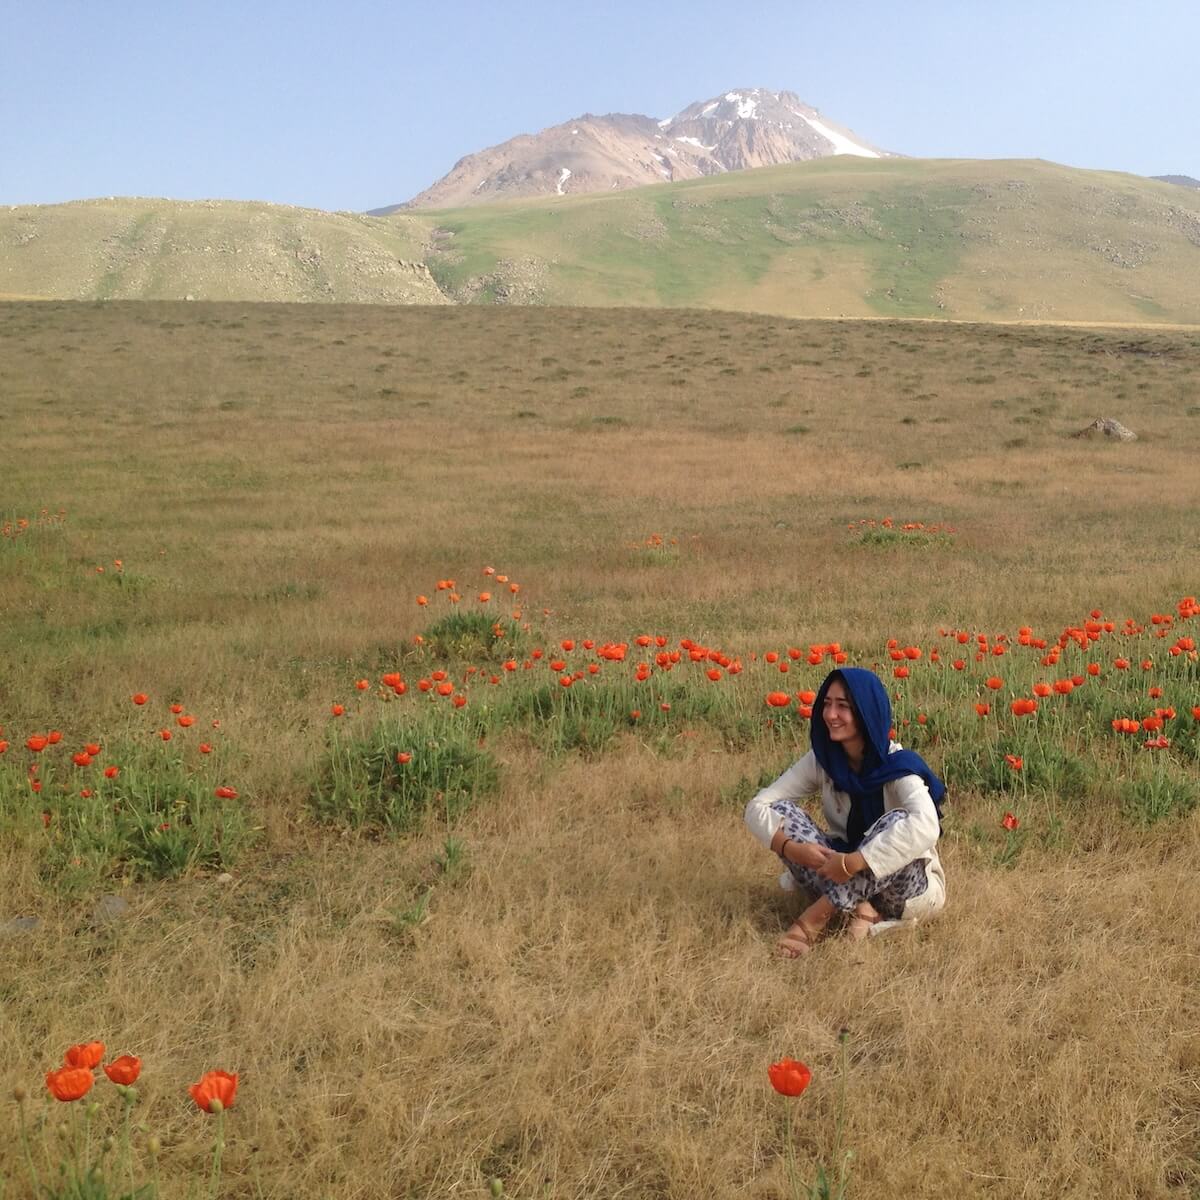 Saba Rouhani sitting in a field of flowers